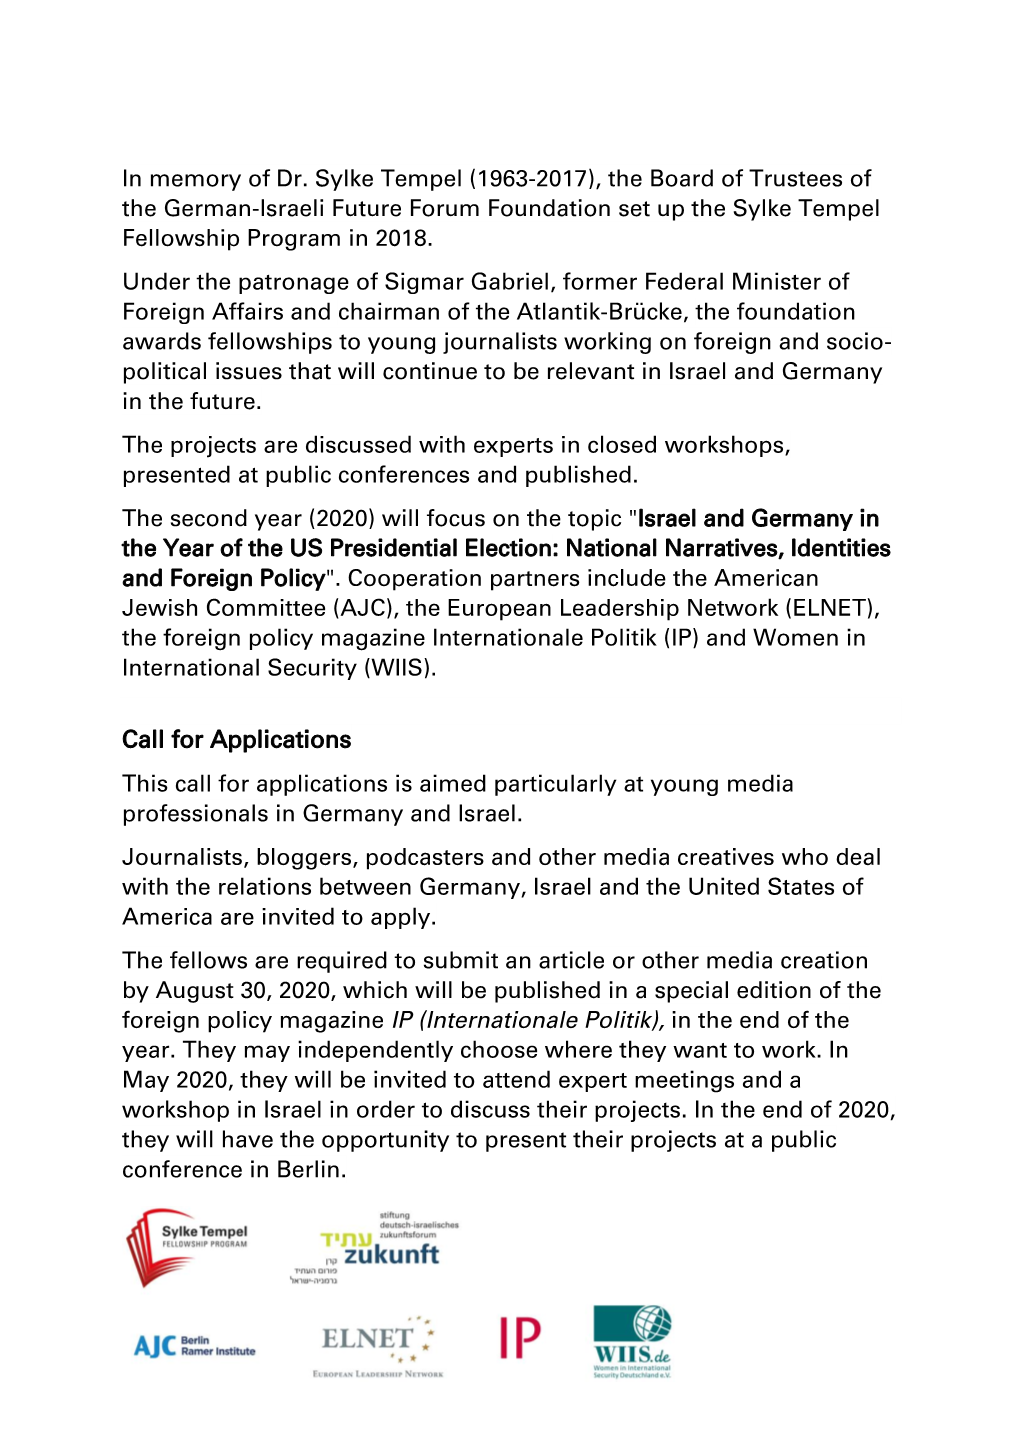 Call for Applications This Call for Applications Is Aimed Particularly at Young Media Professionals in Germany and Israel